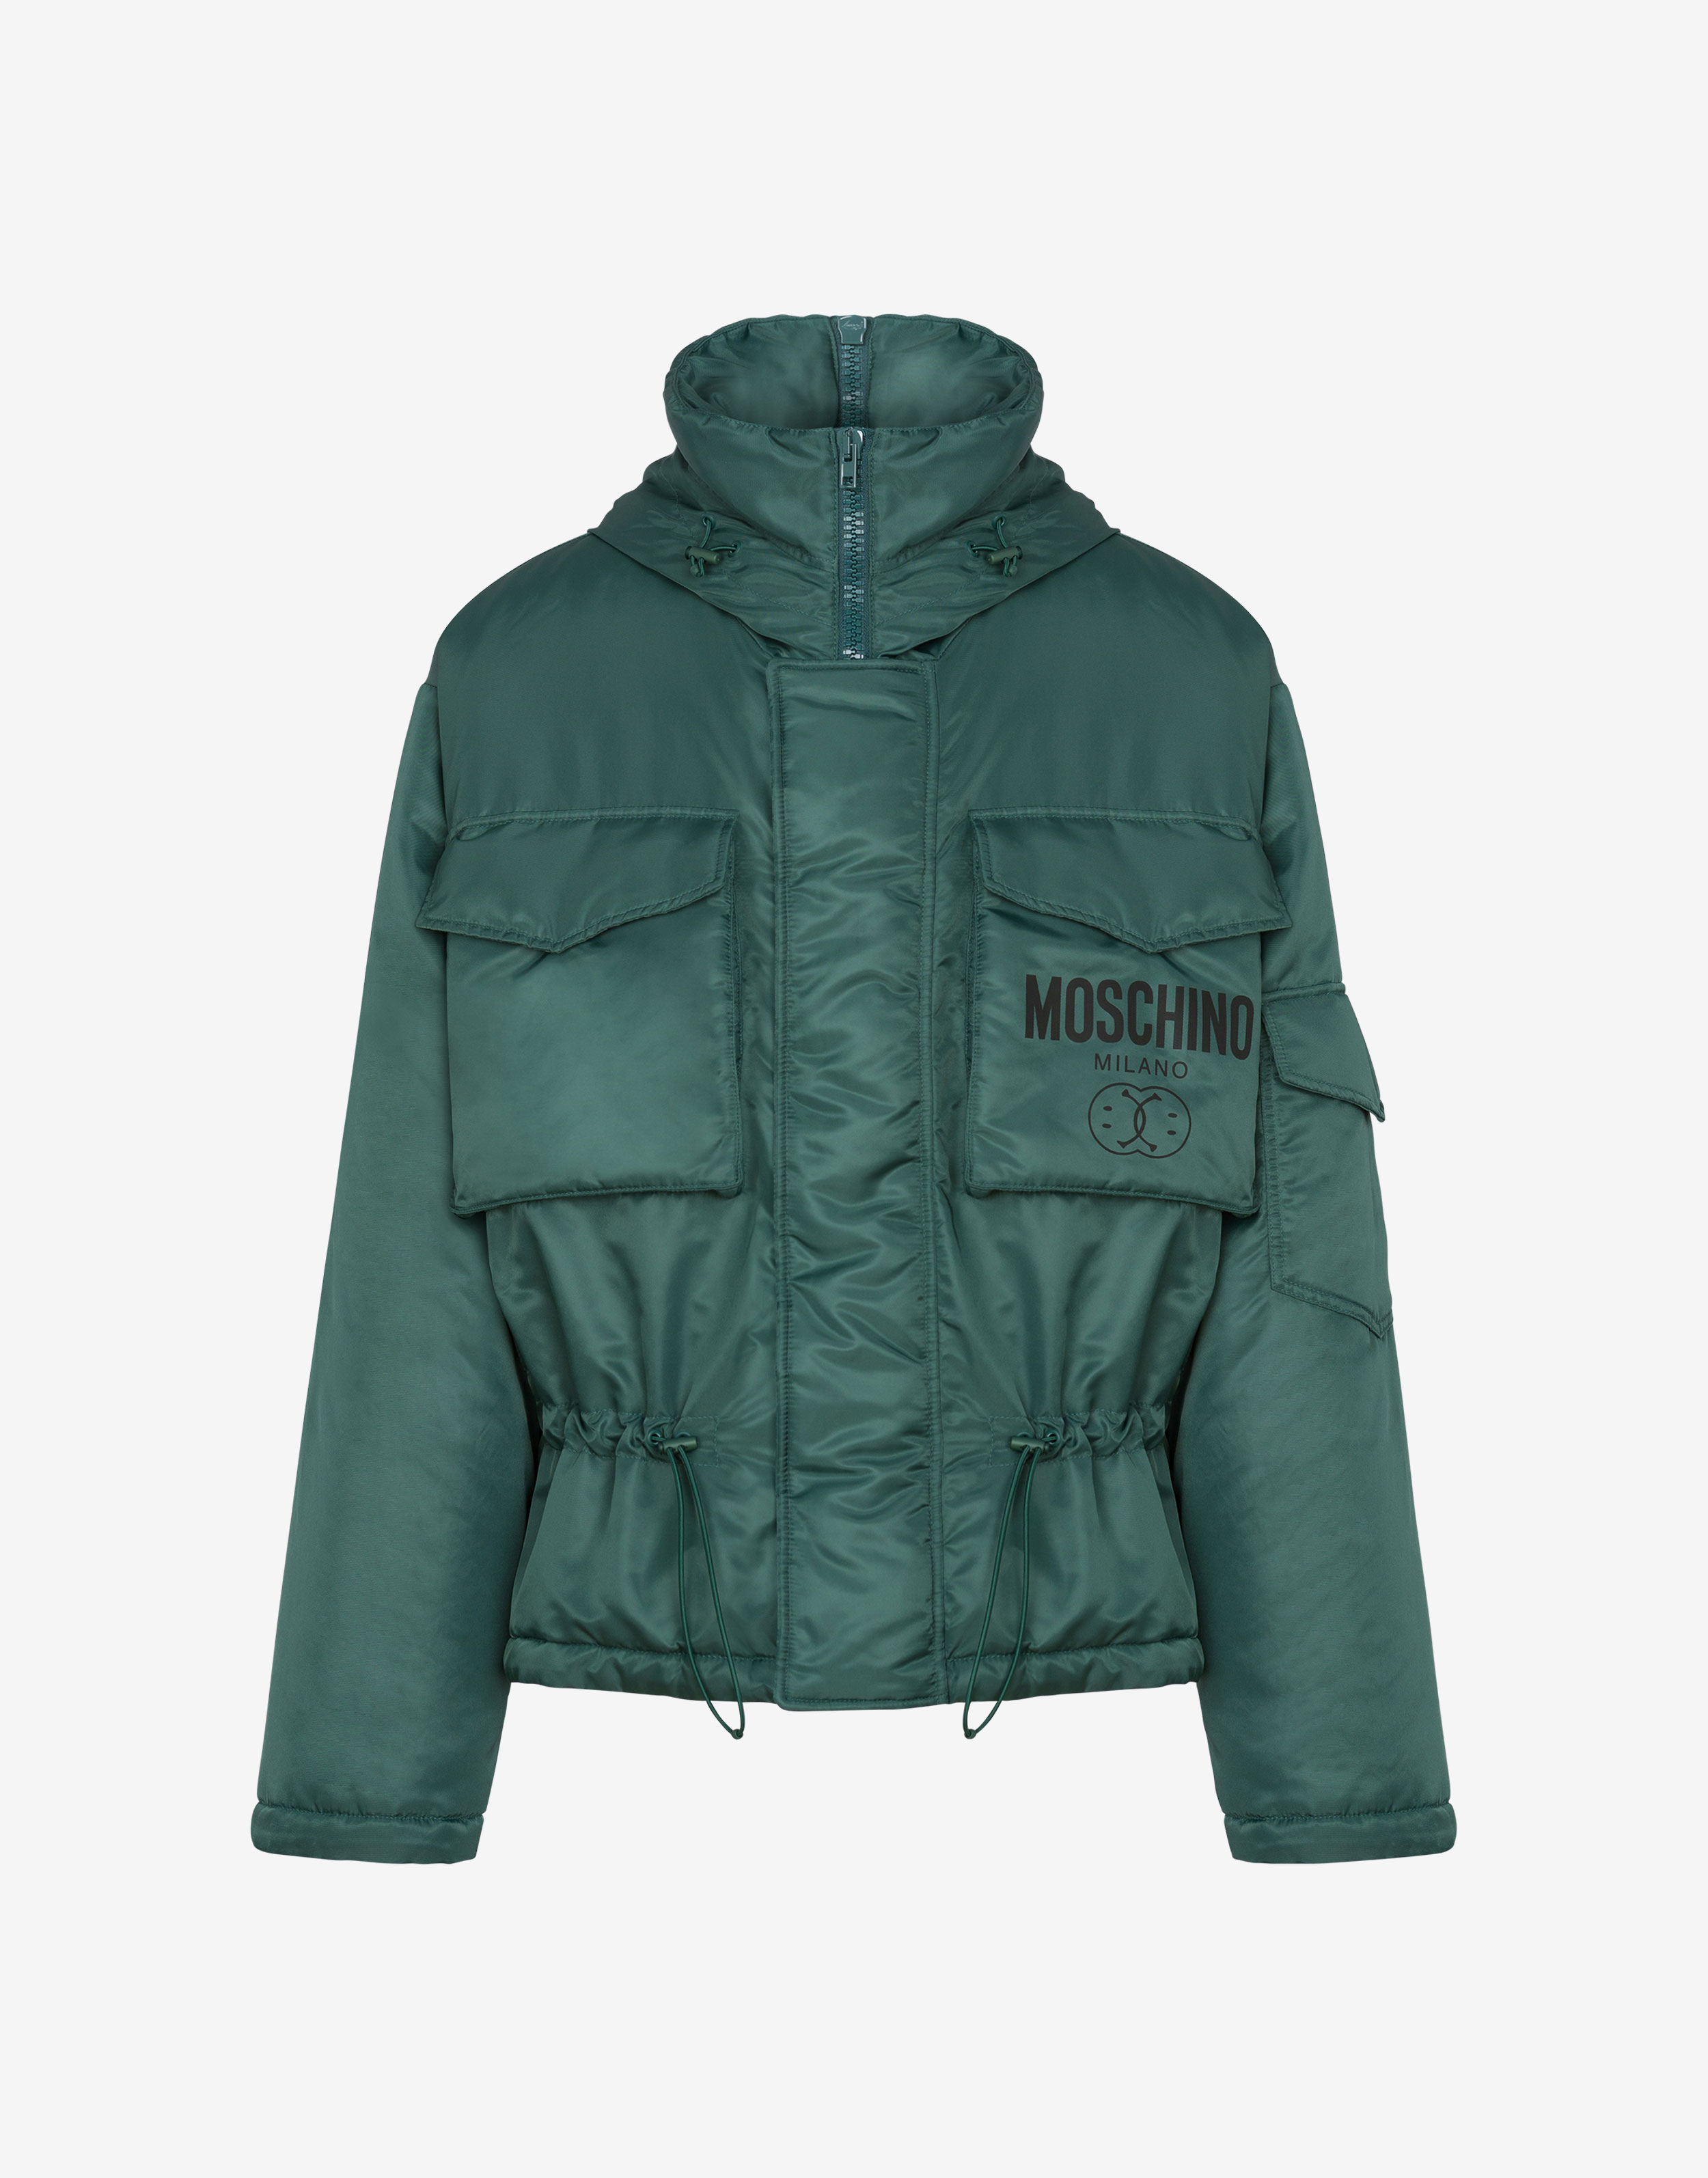 Moschino コート & Outerwear for メンズ - Official Store